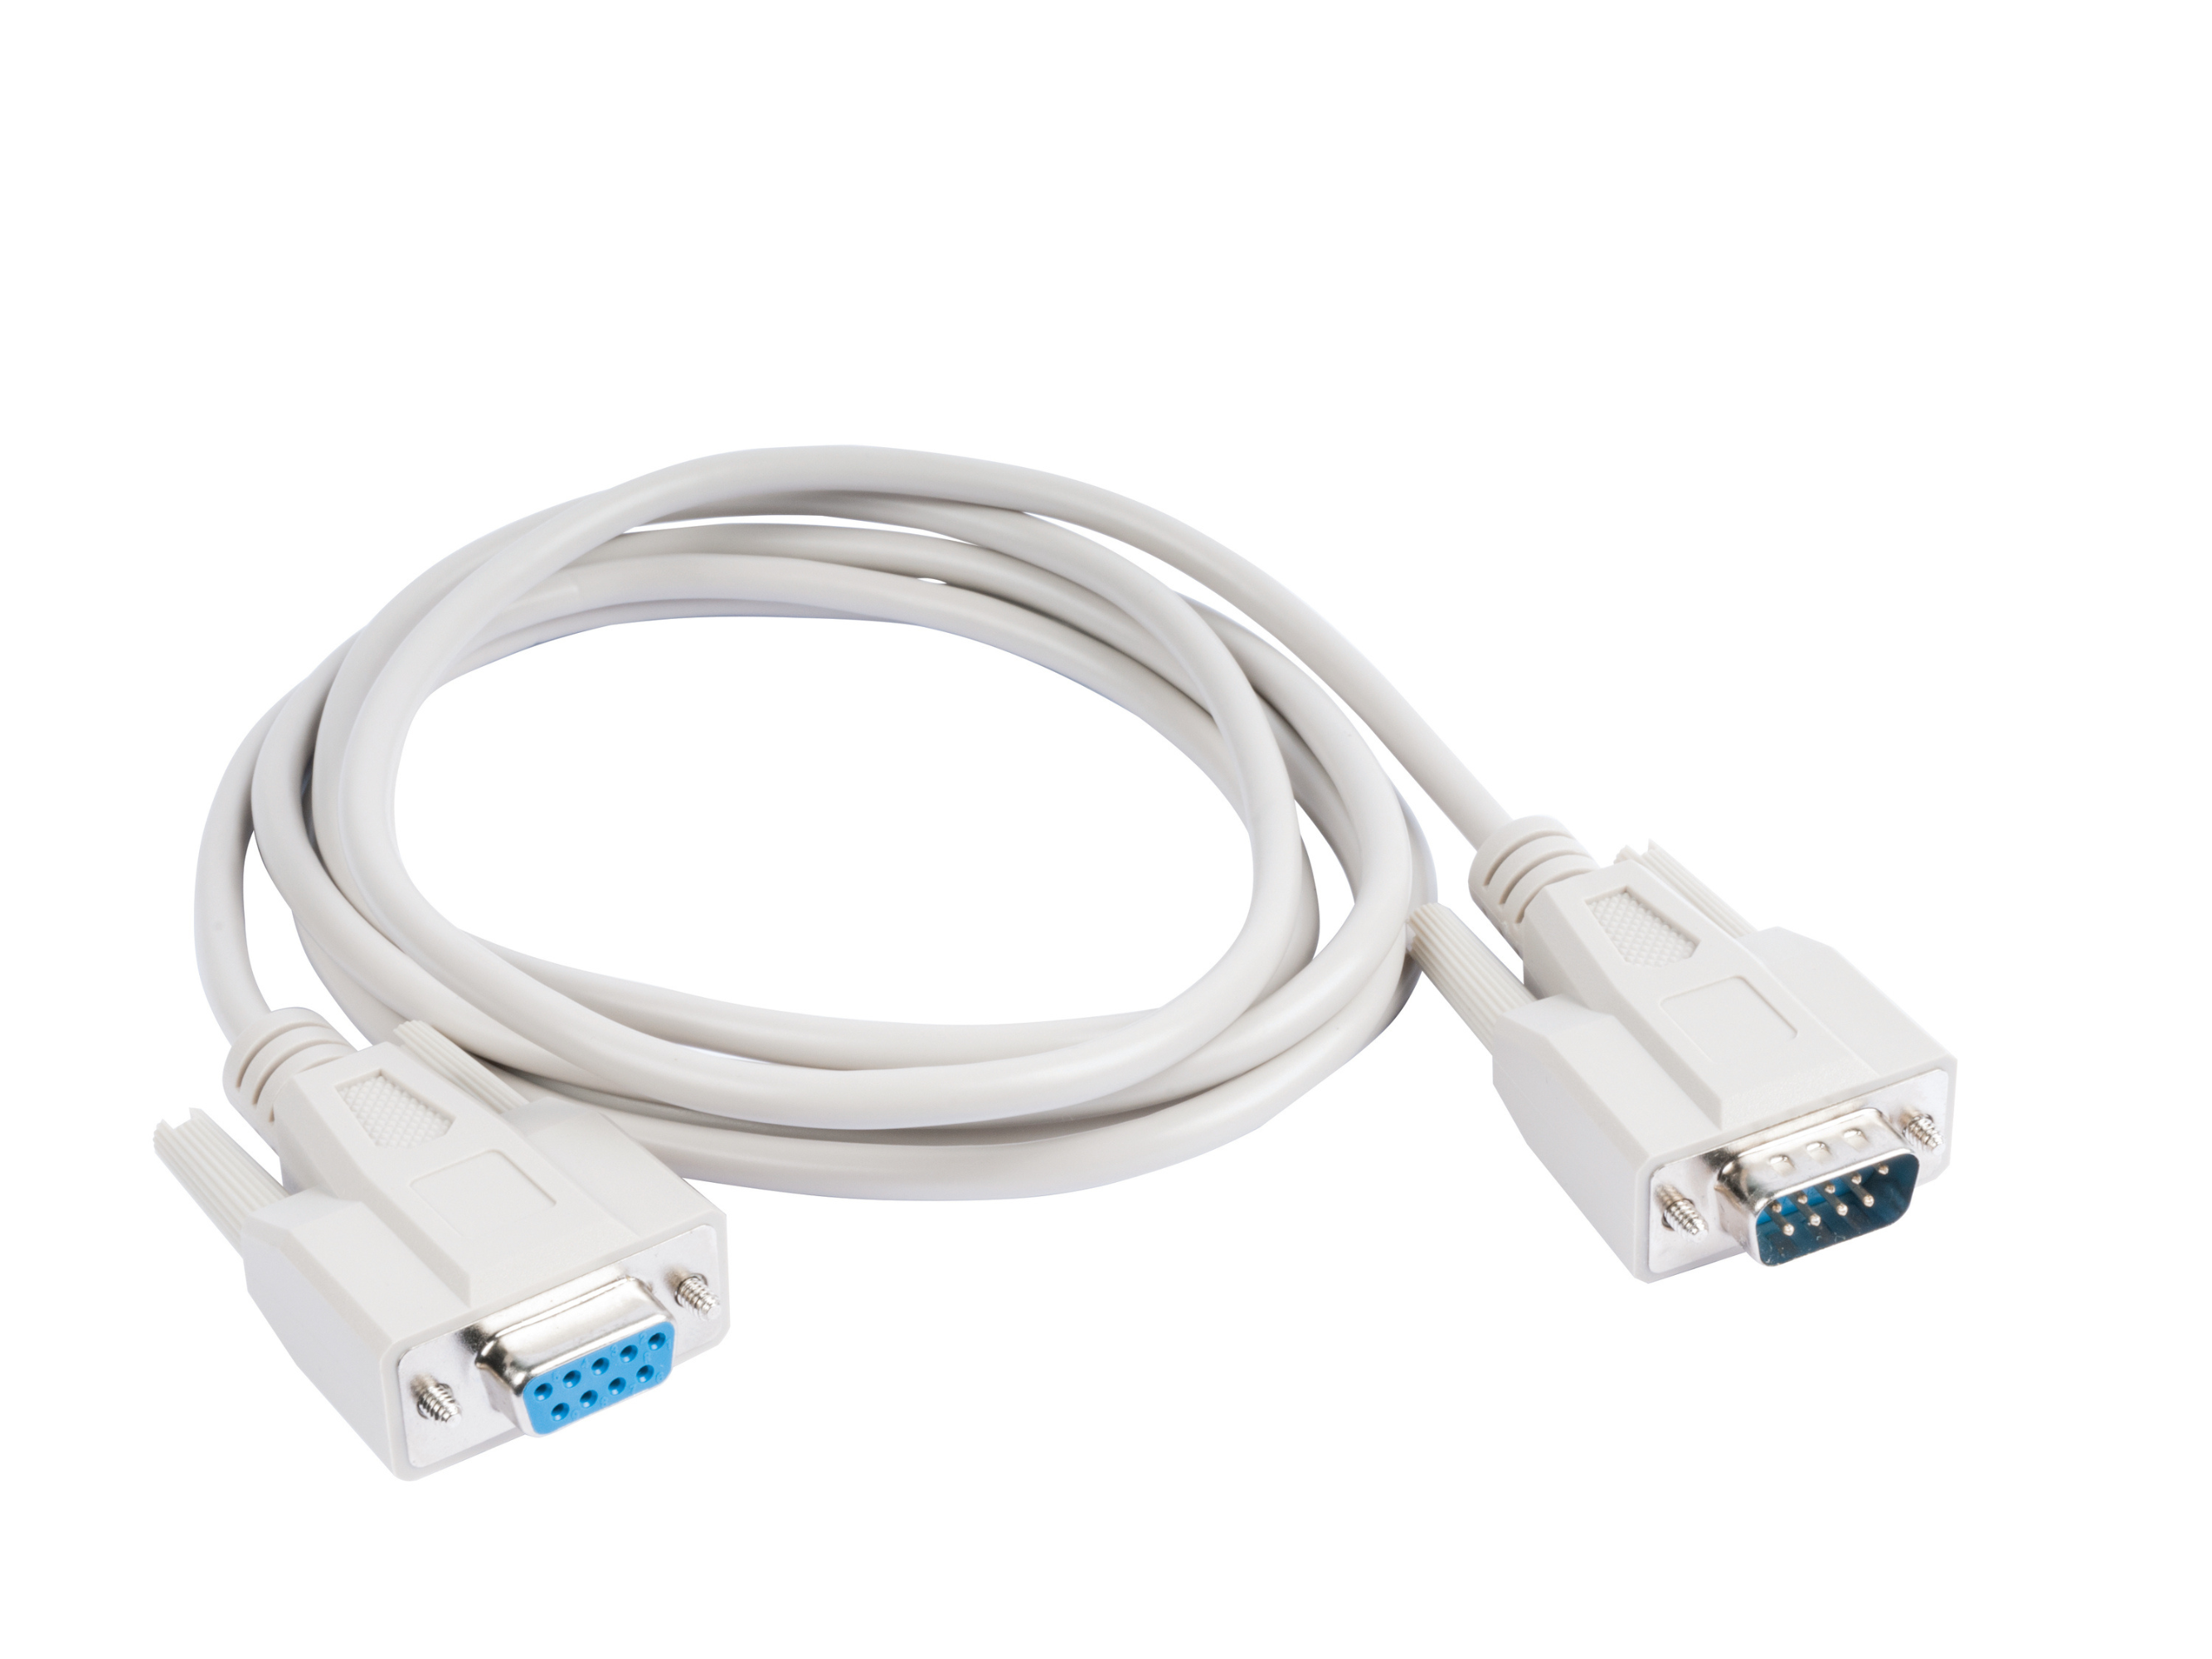 Sub-D 9p/m to USB cable, 2 m